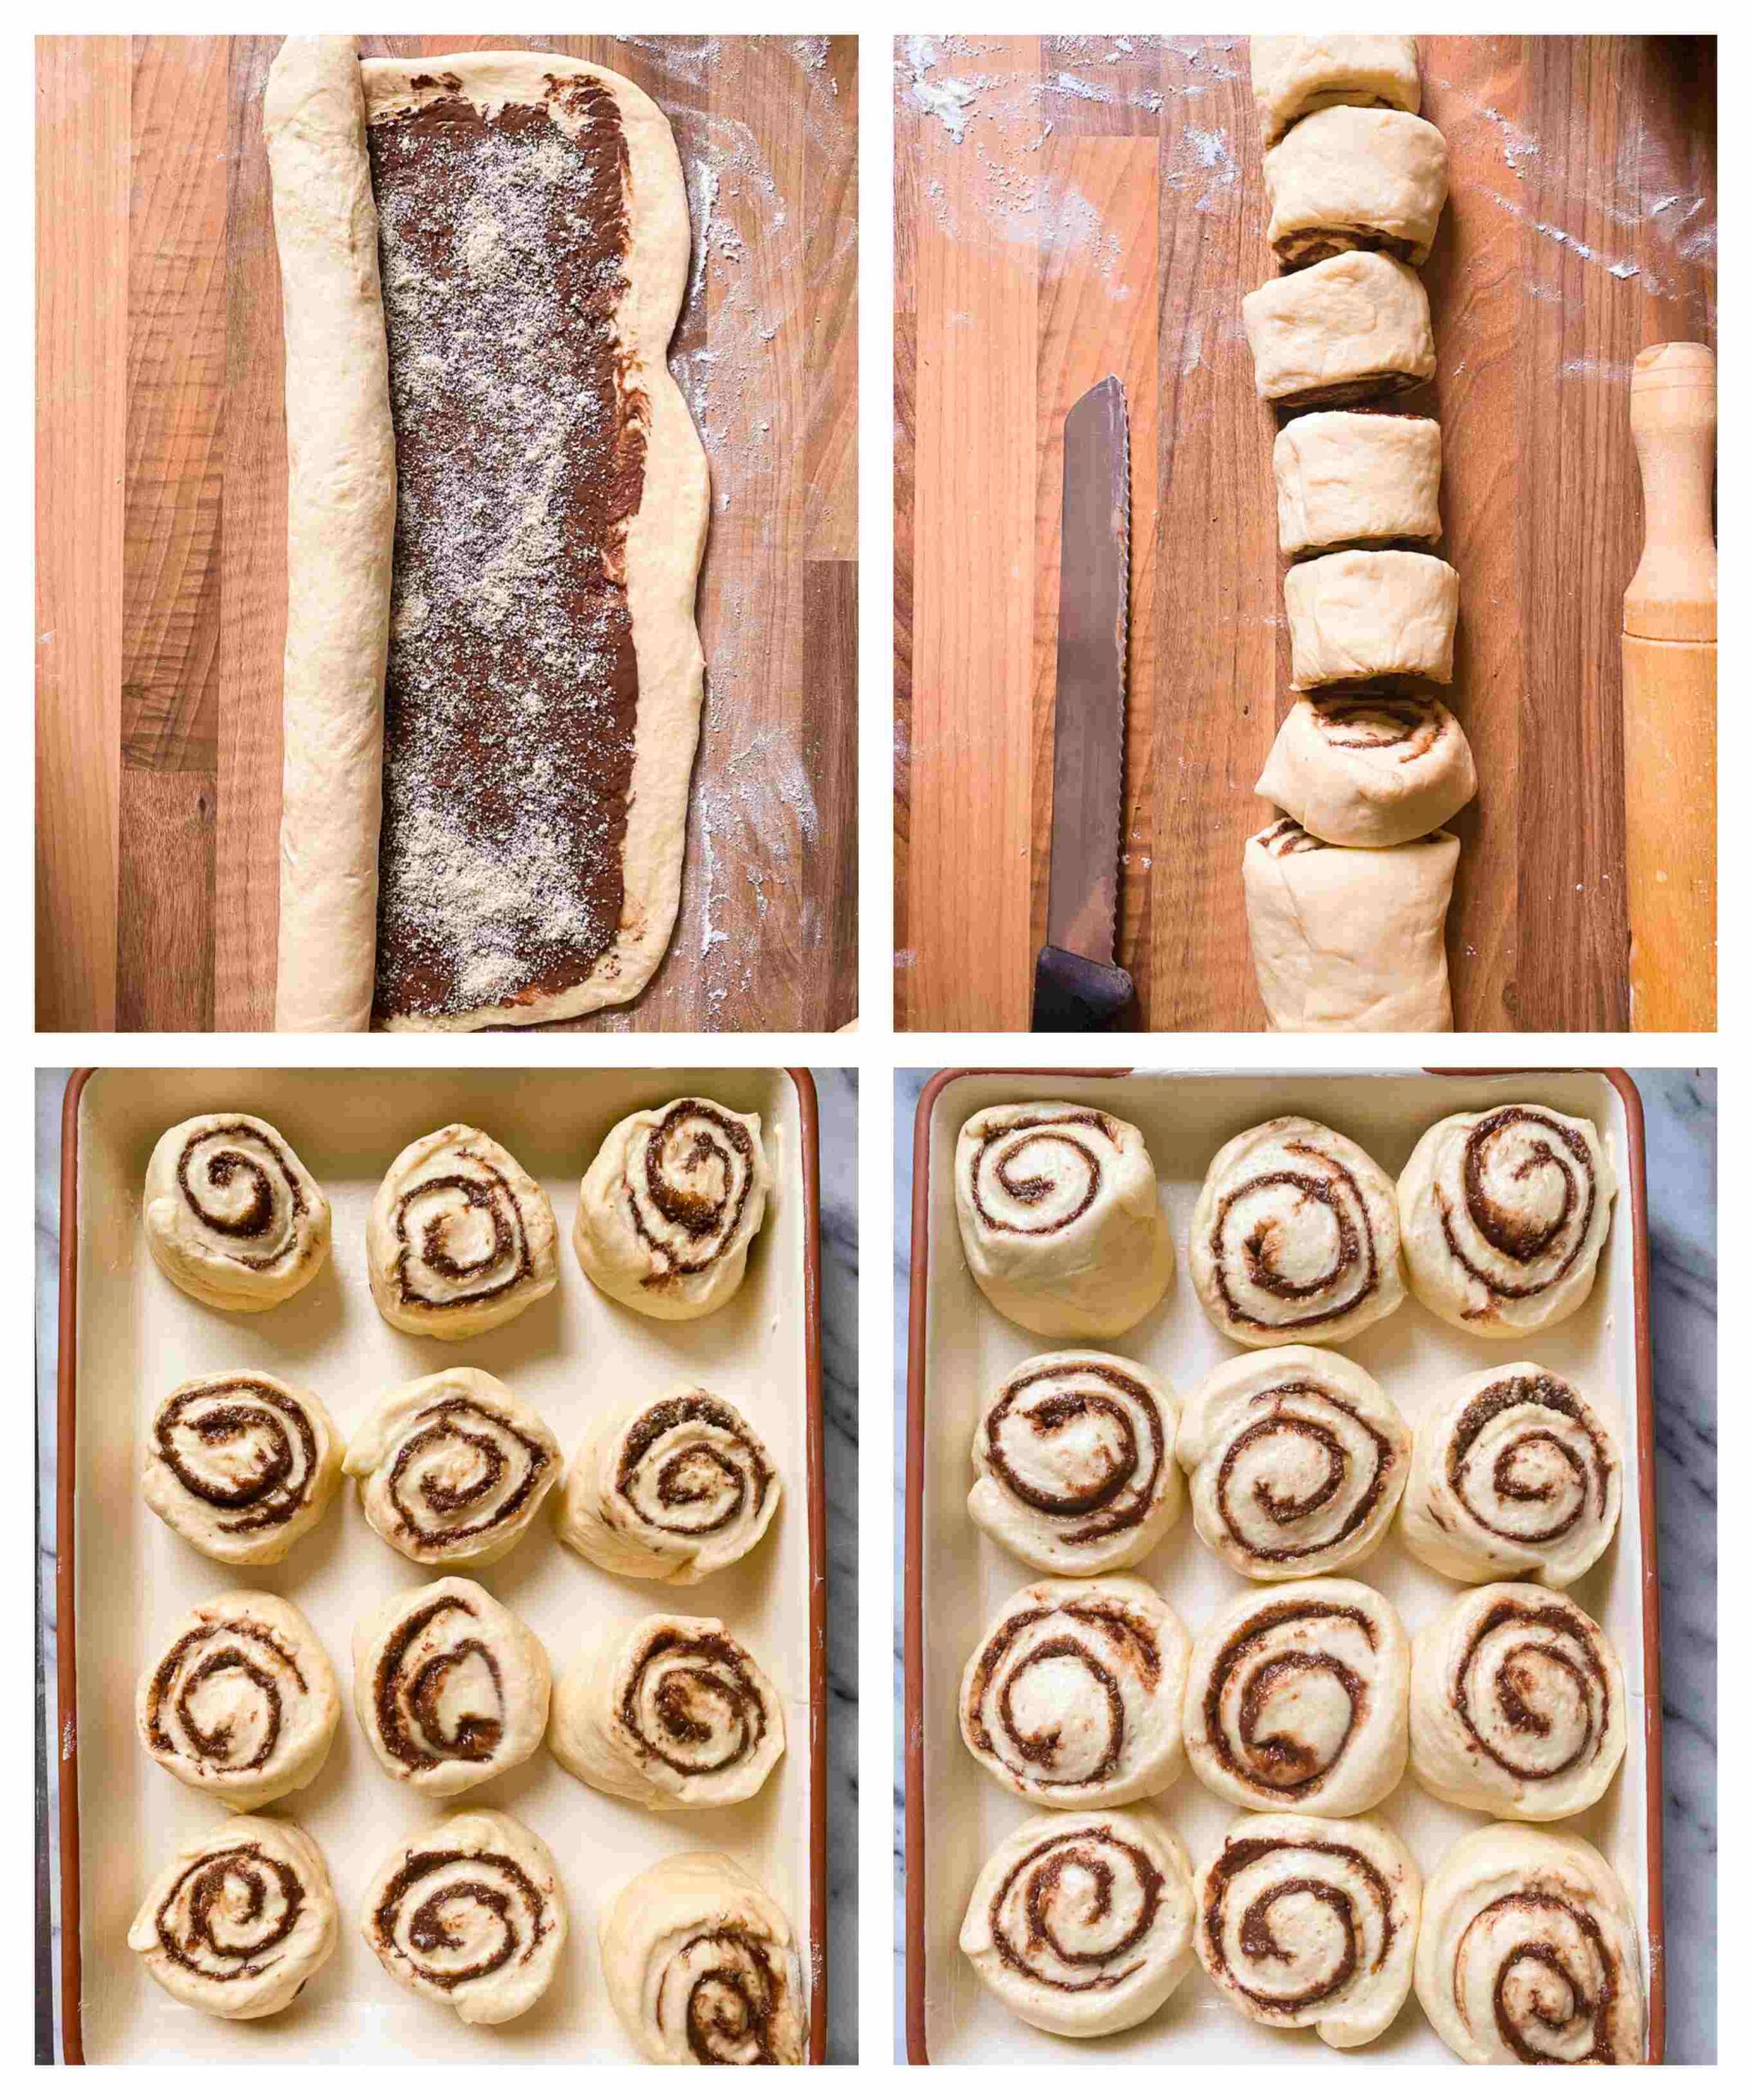 nutella rolls process images 2